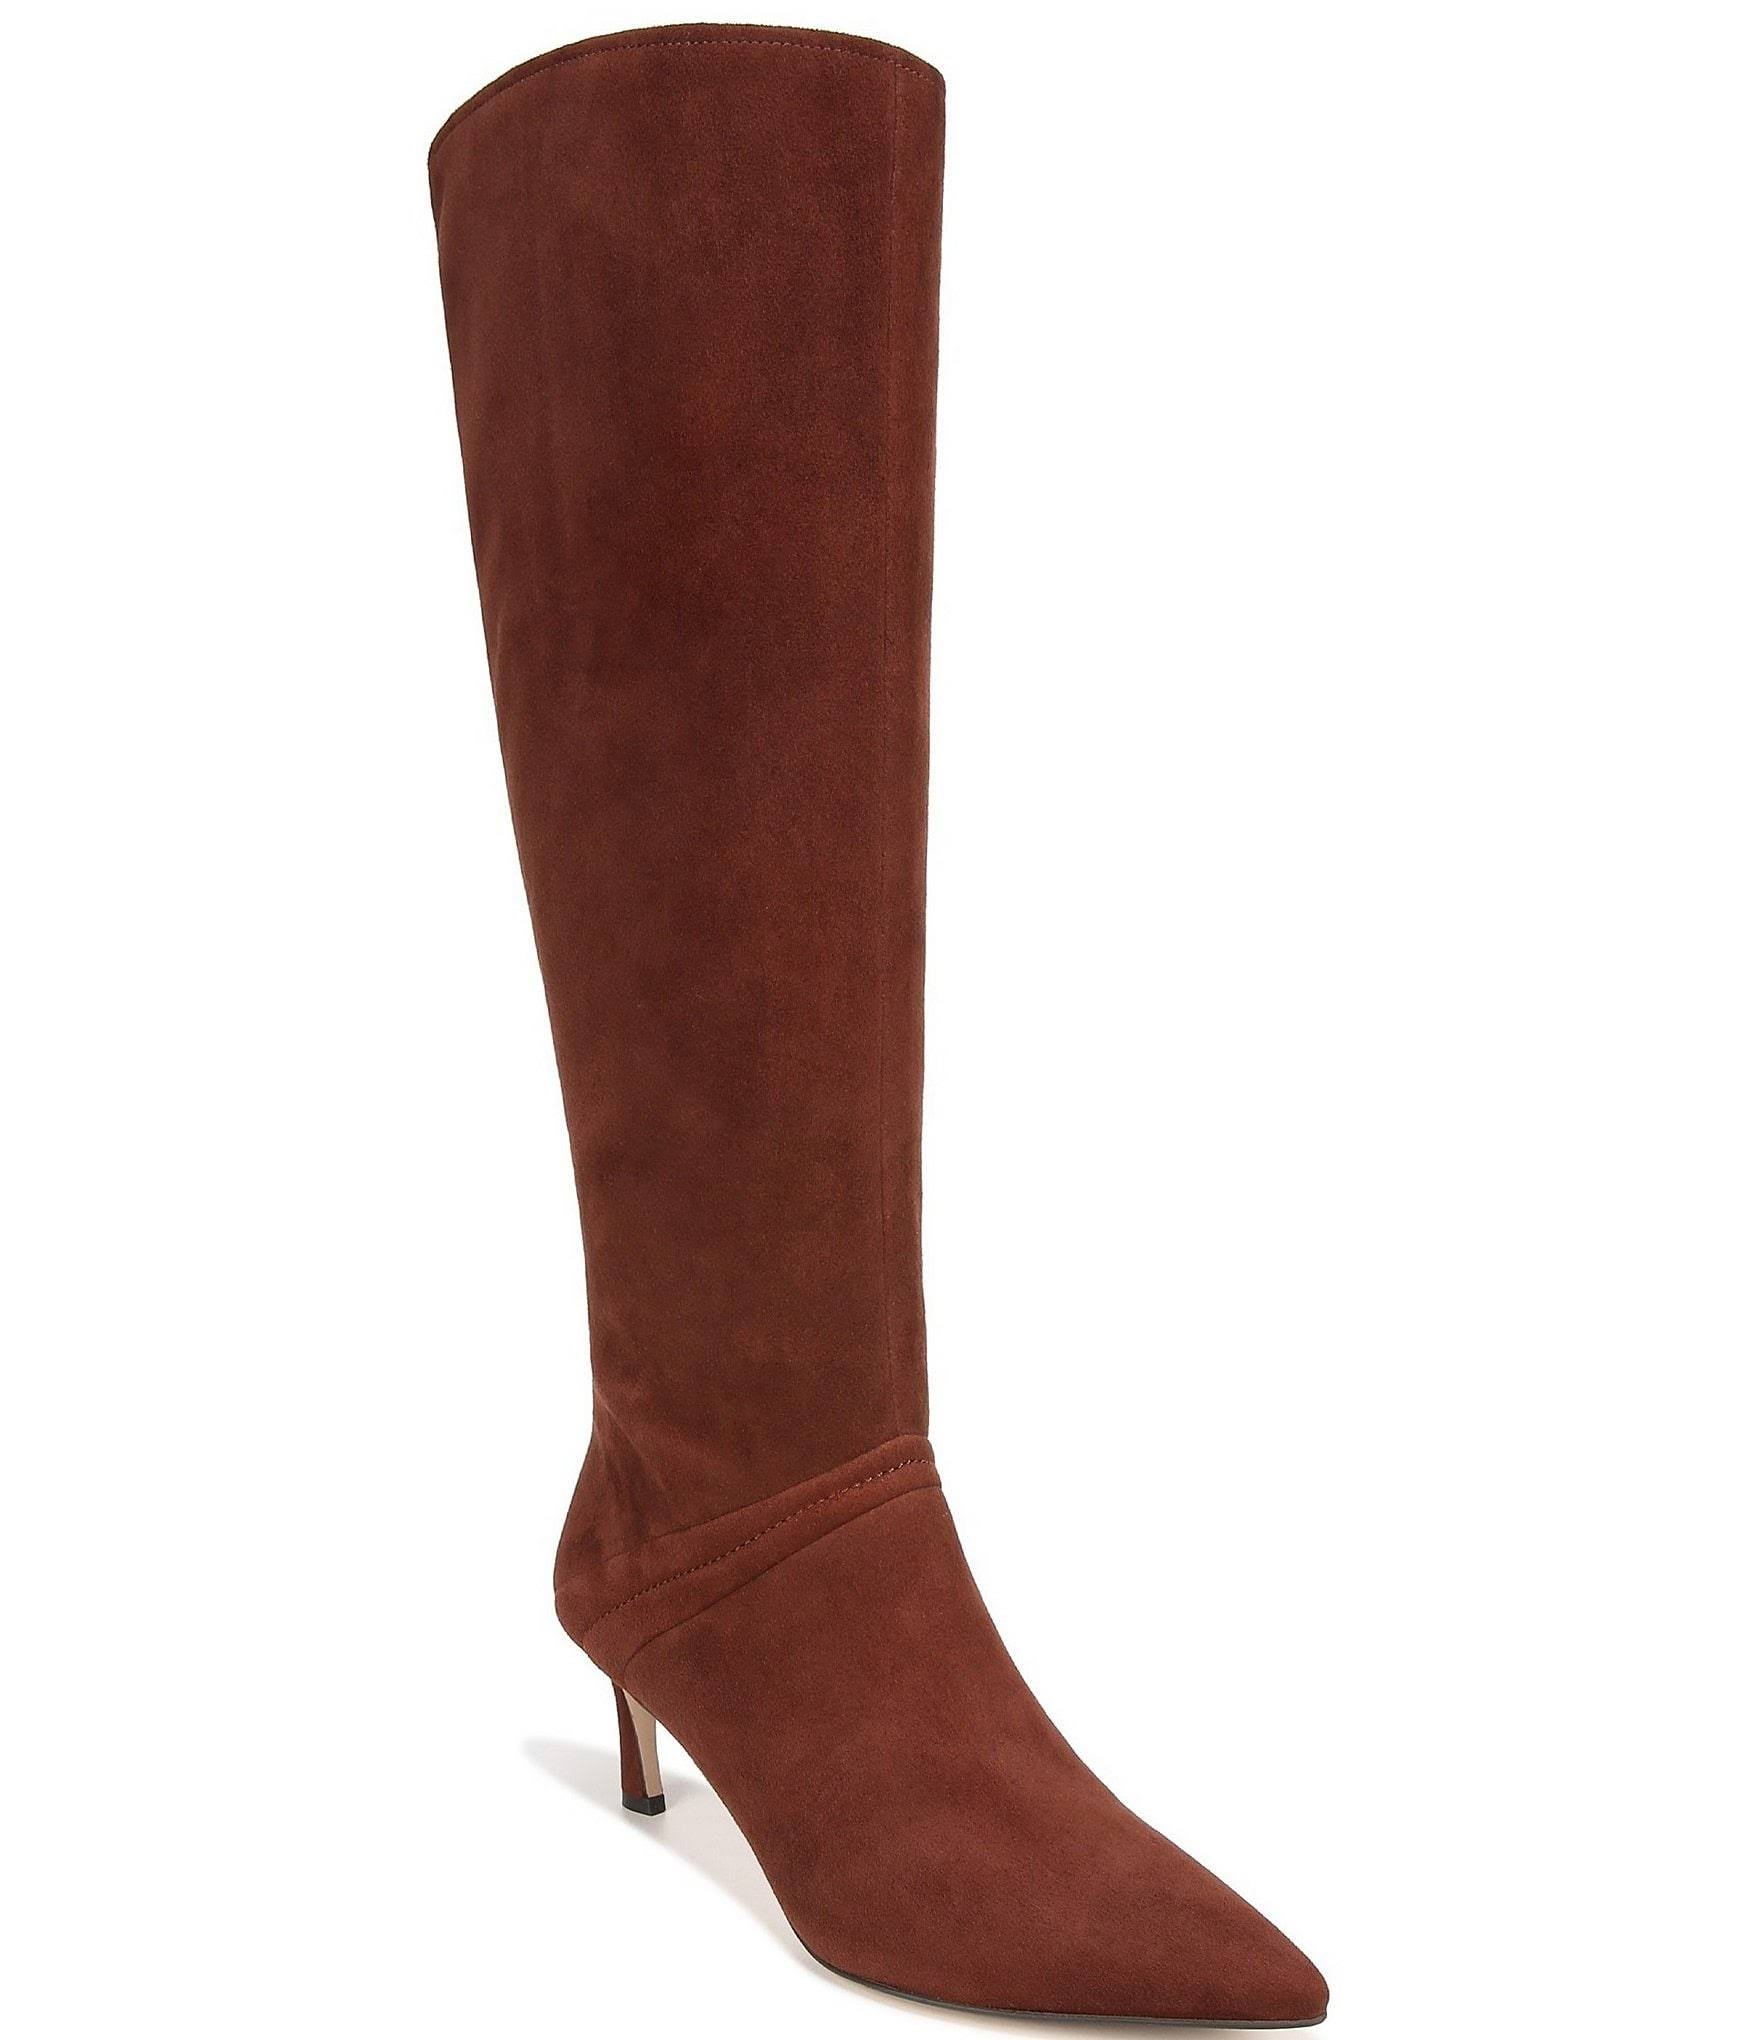 Pine Needle Green Knee-High Boots | Image